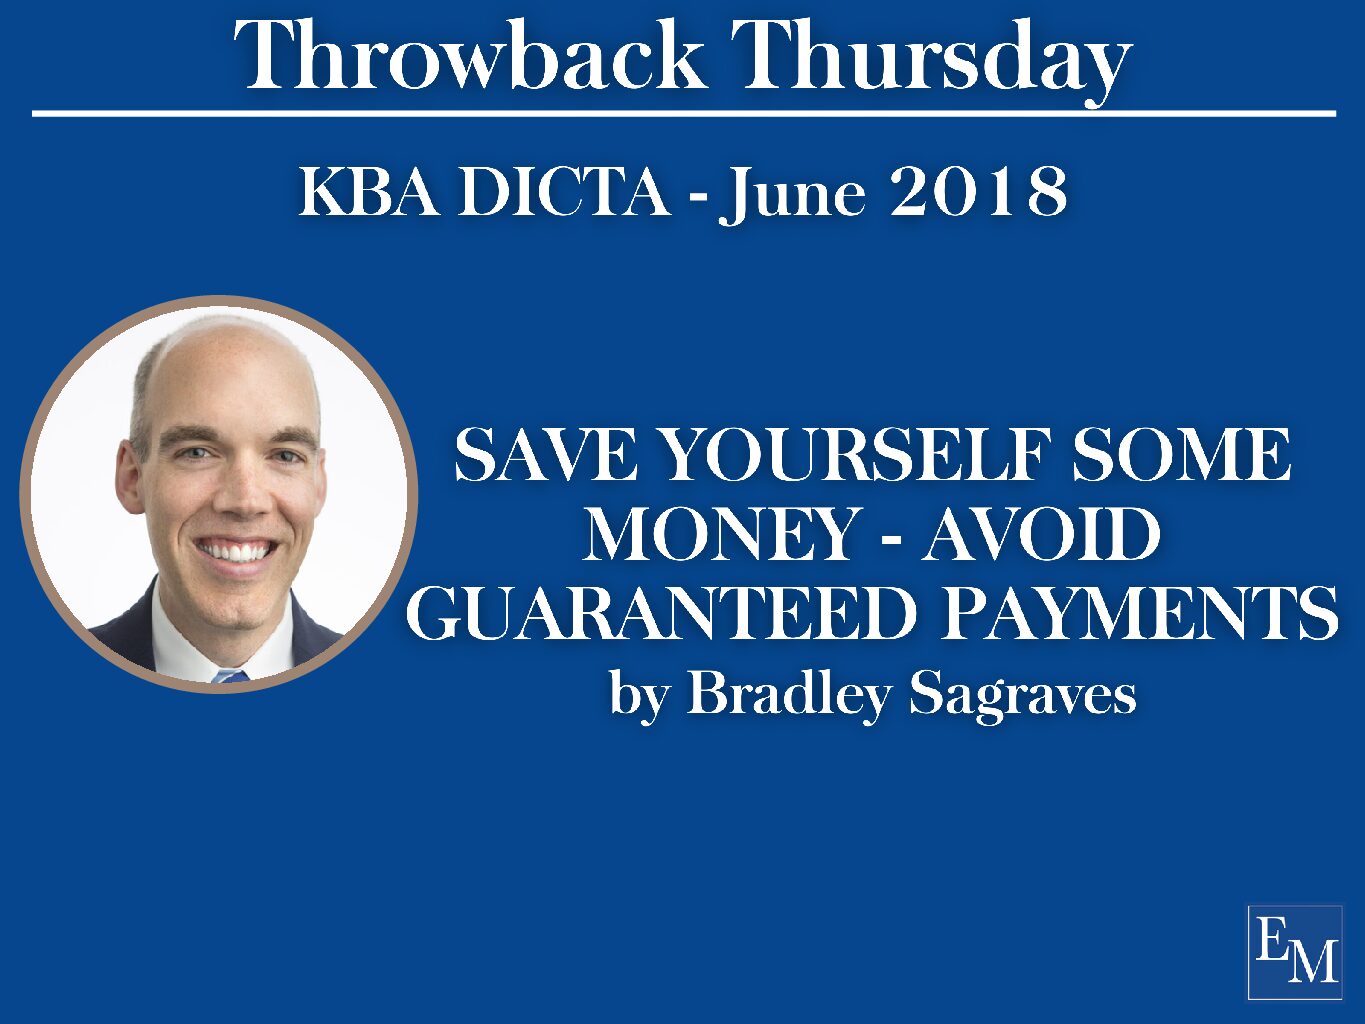 Throwback Thursday: SAVE YOURSELF SOME MONEY – AVOID GUARANTEED PAYMENTS by Bradley Sagraves